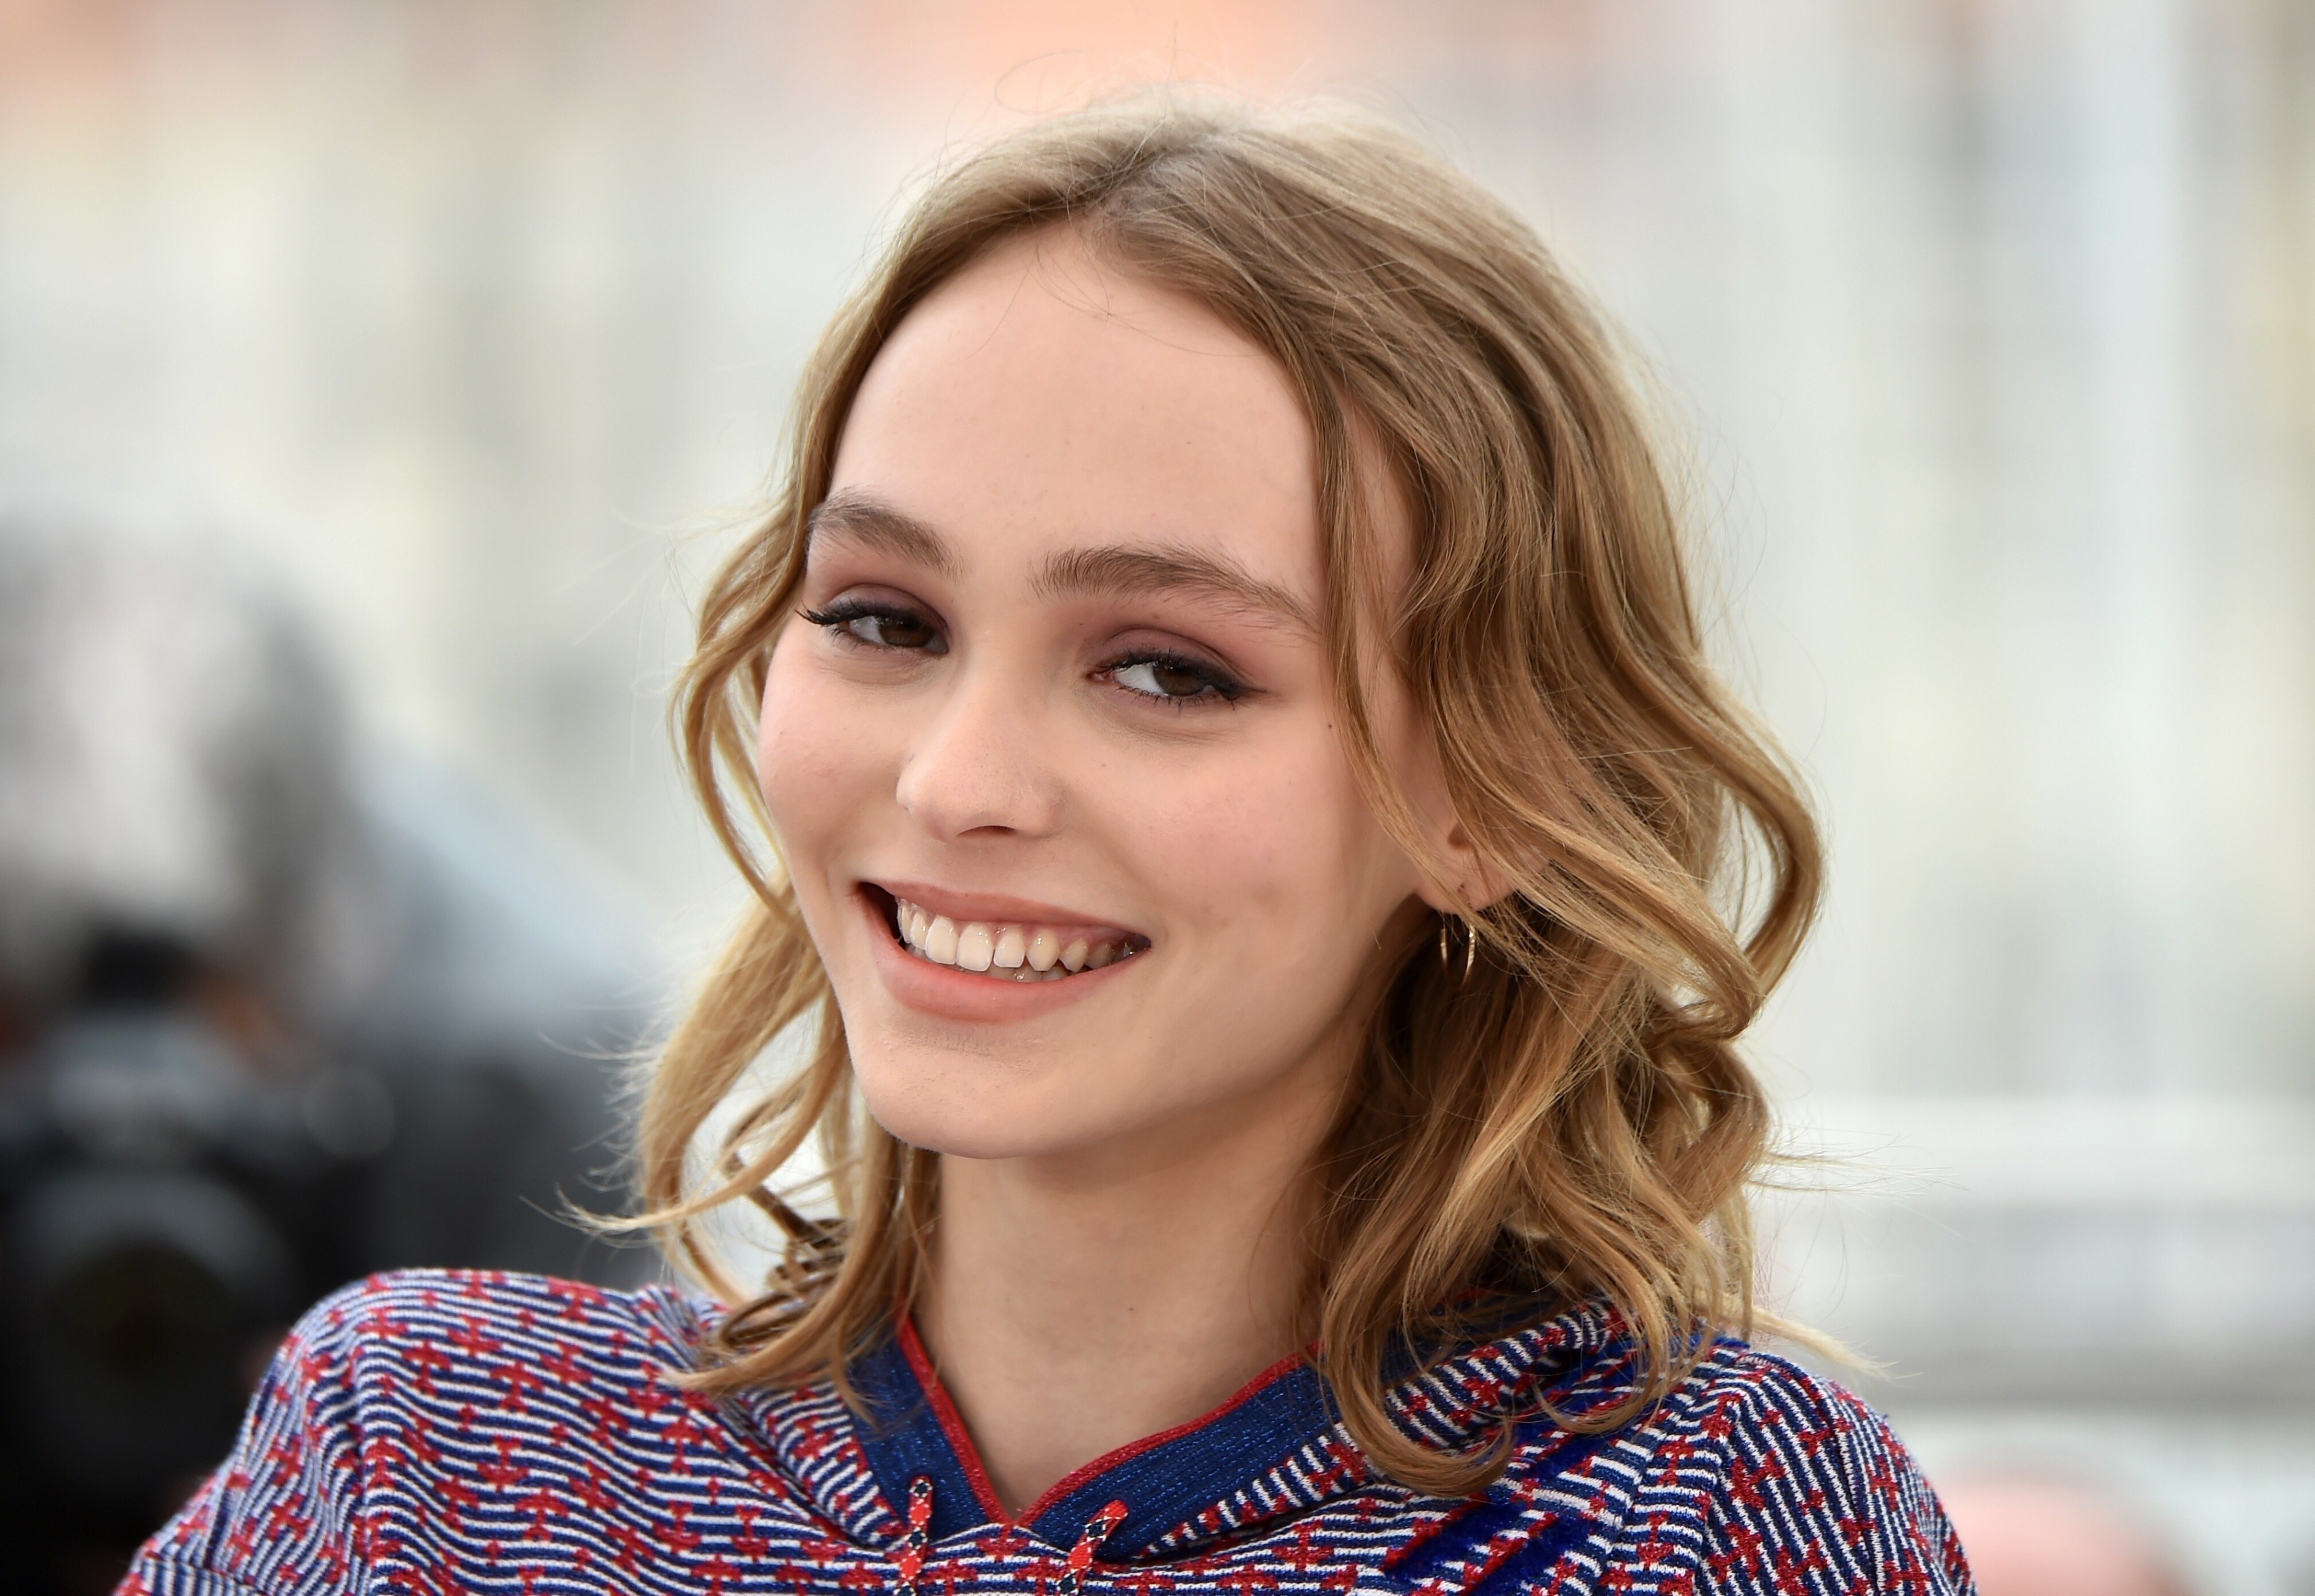 Lily Rose Depp Wallpapers